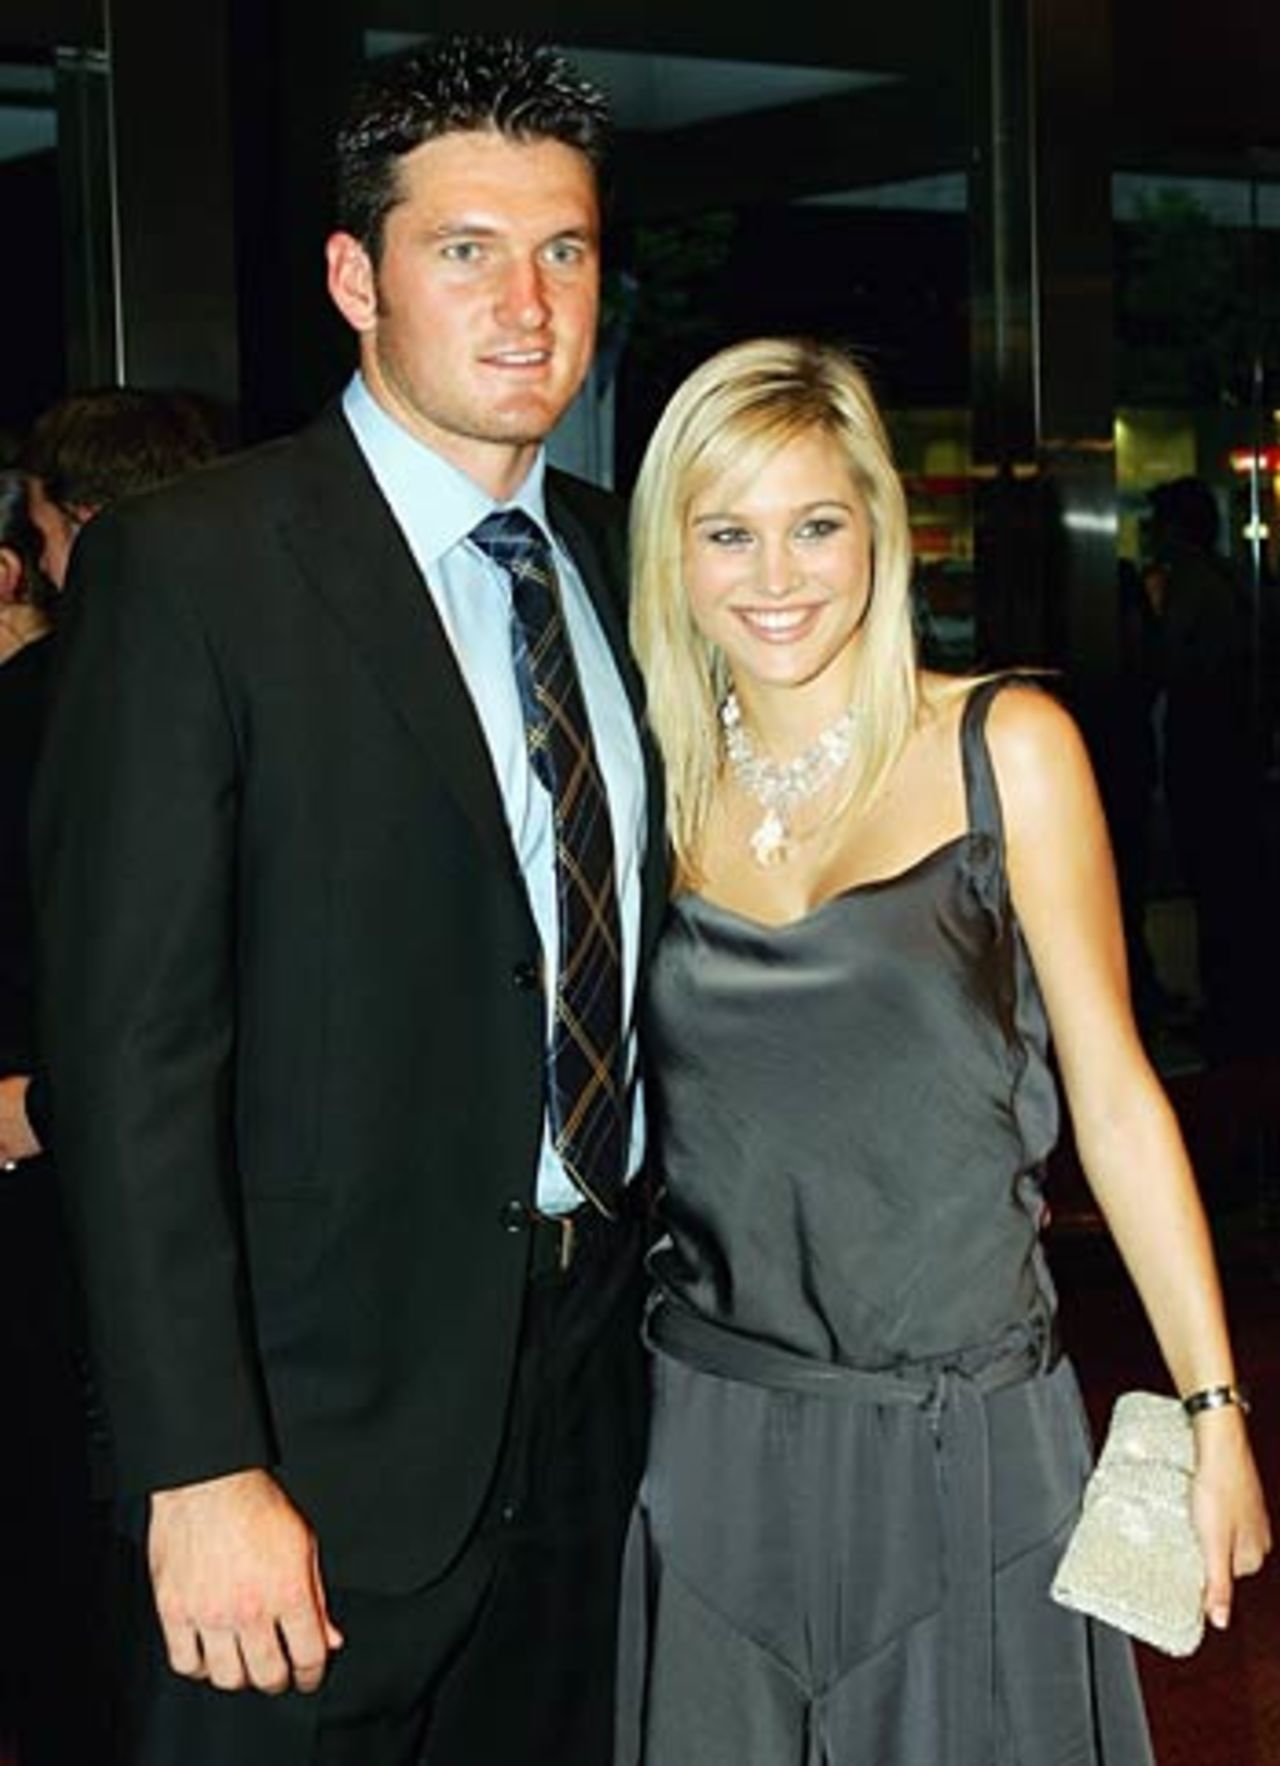 Graeme Smith and Minki Van Der Westhuizen pose for the cameras at the ICC awards dinner, Sydney, October 11, 2005